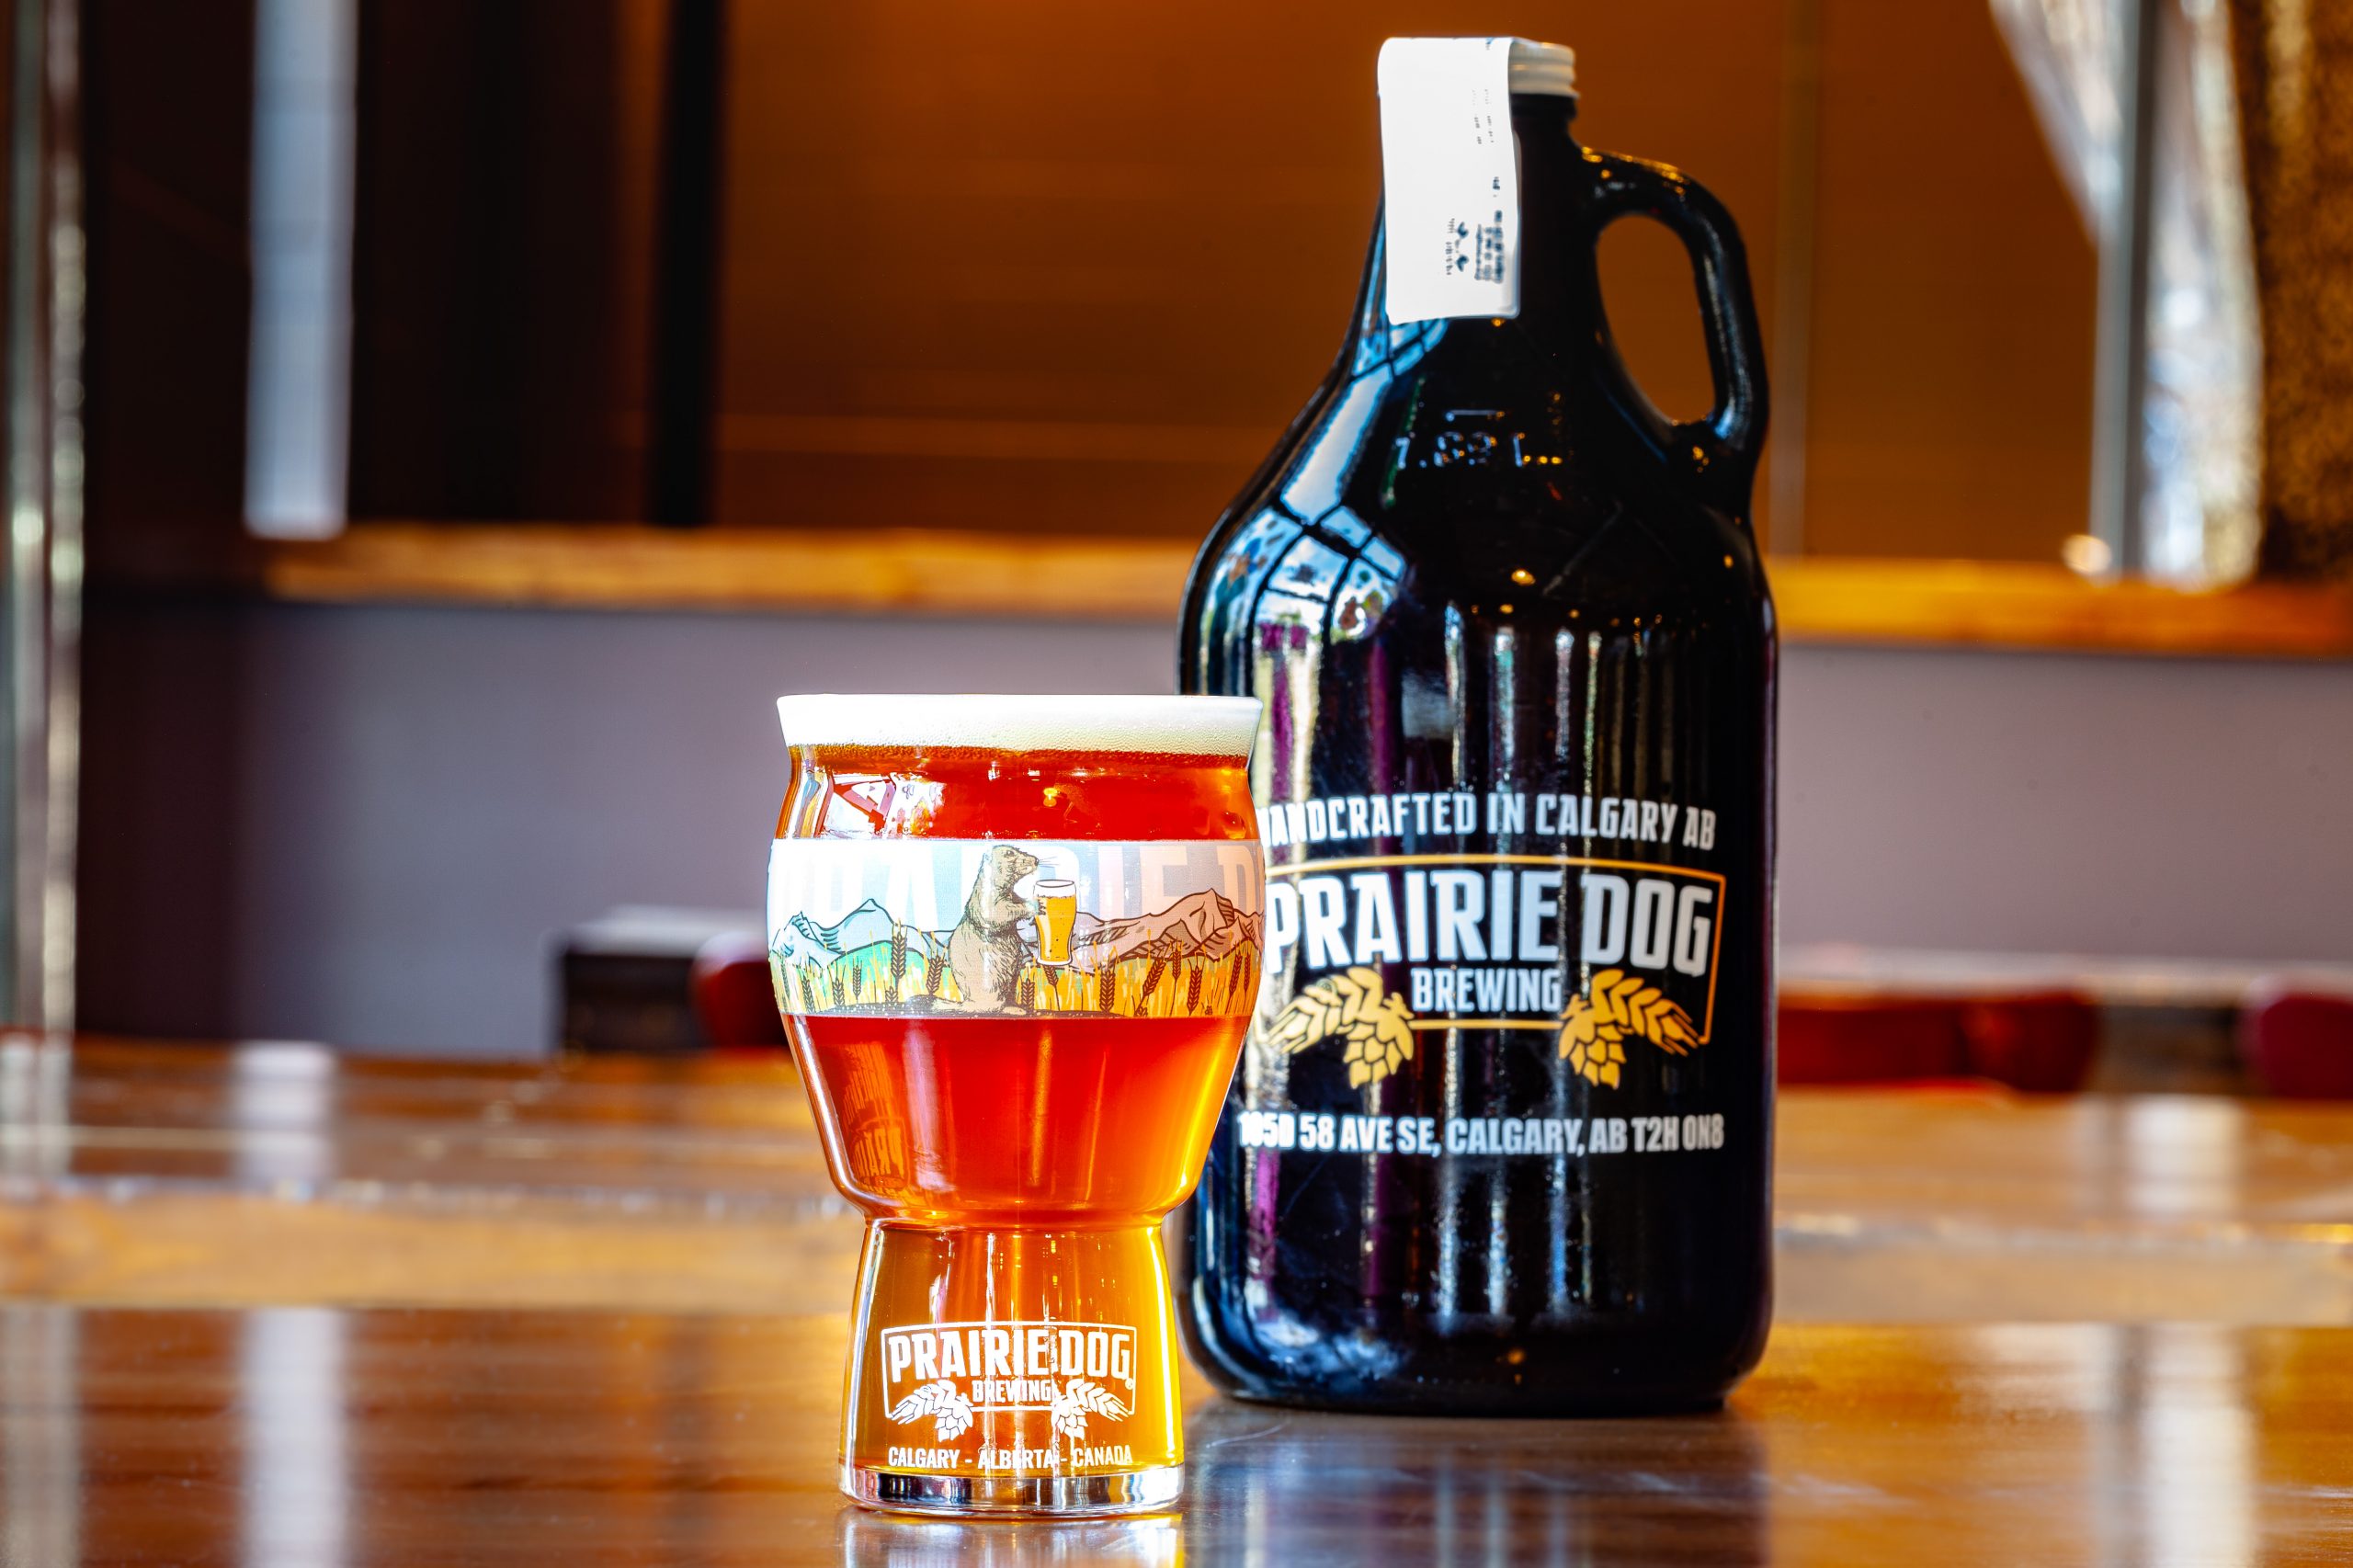 Prairie Dog Brewing's Tail Twitcher IPA craft beer in a branded 16-oz US pint glass, with a 64-oz branded growler jug in the background.